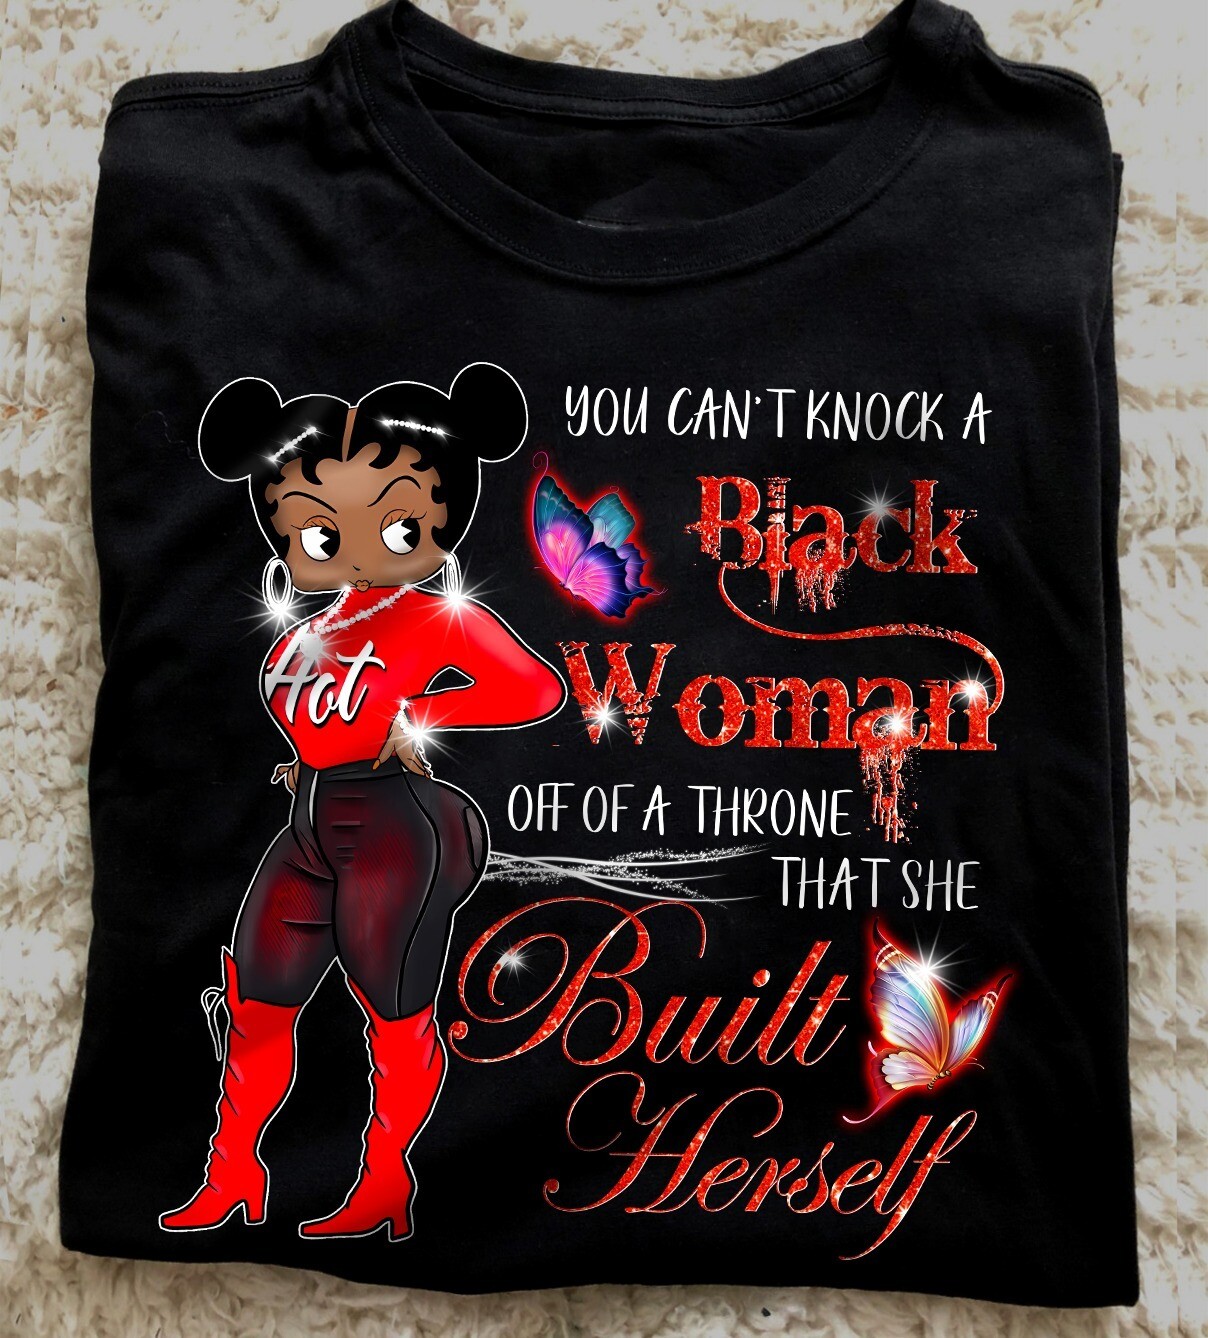 You can’t knock a black woman shirt